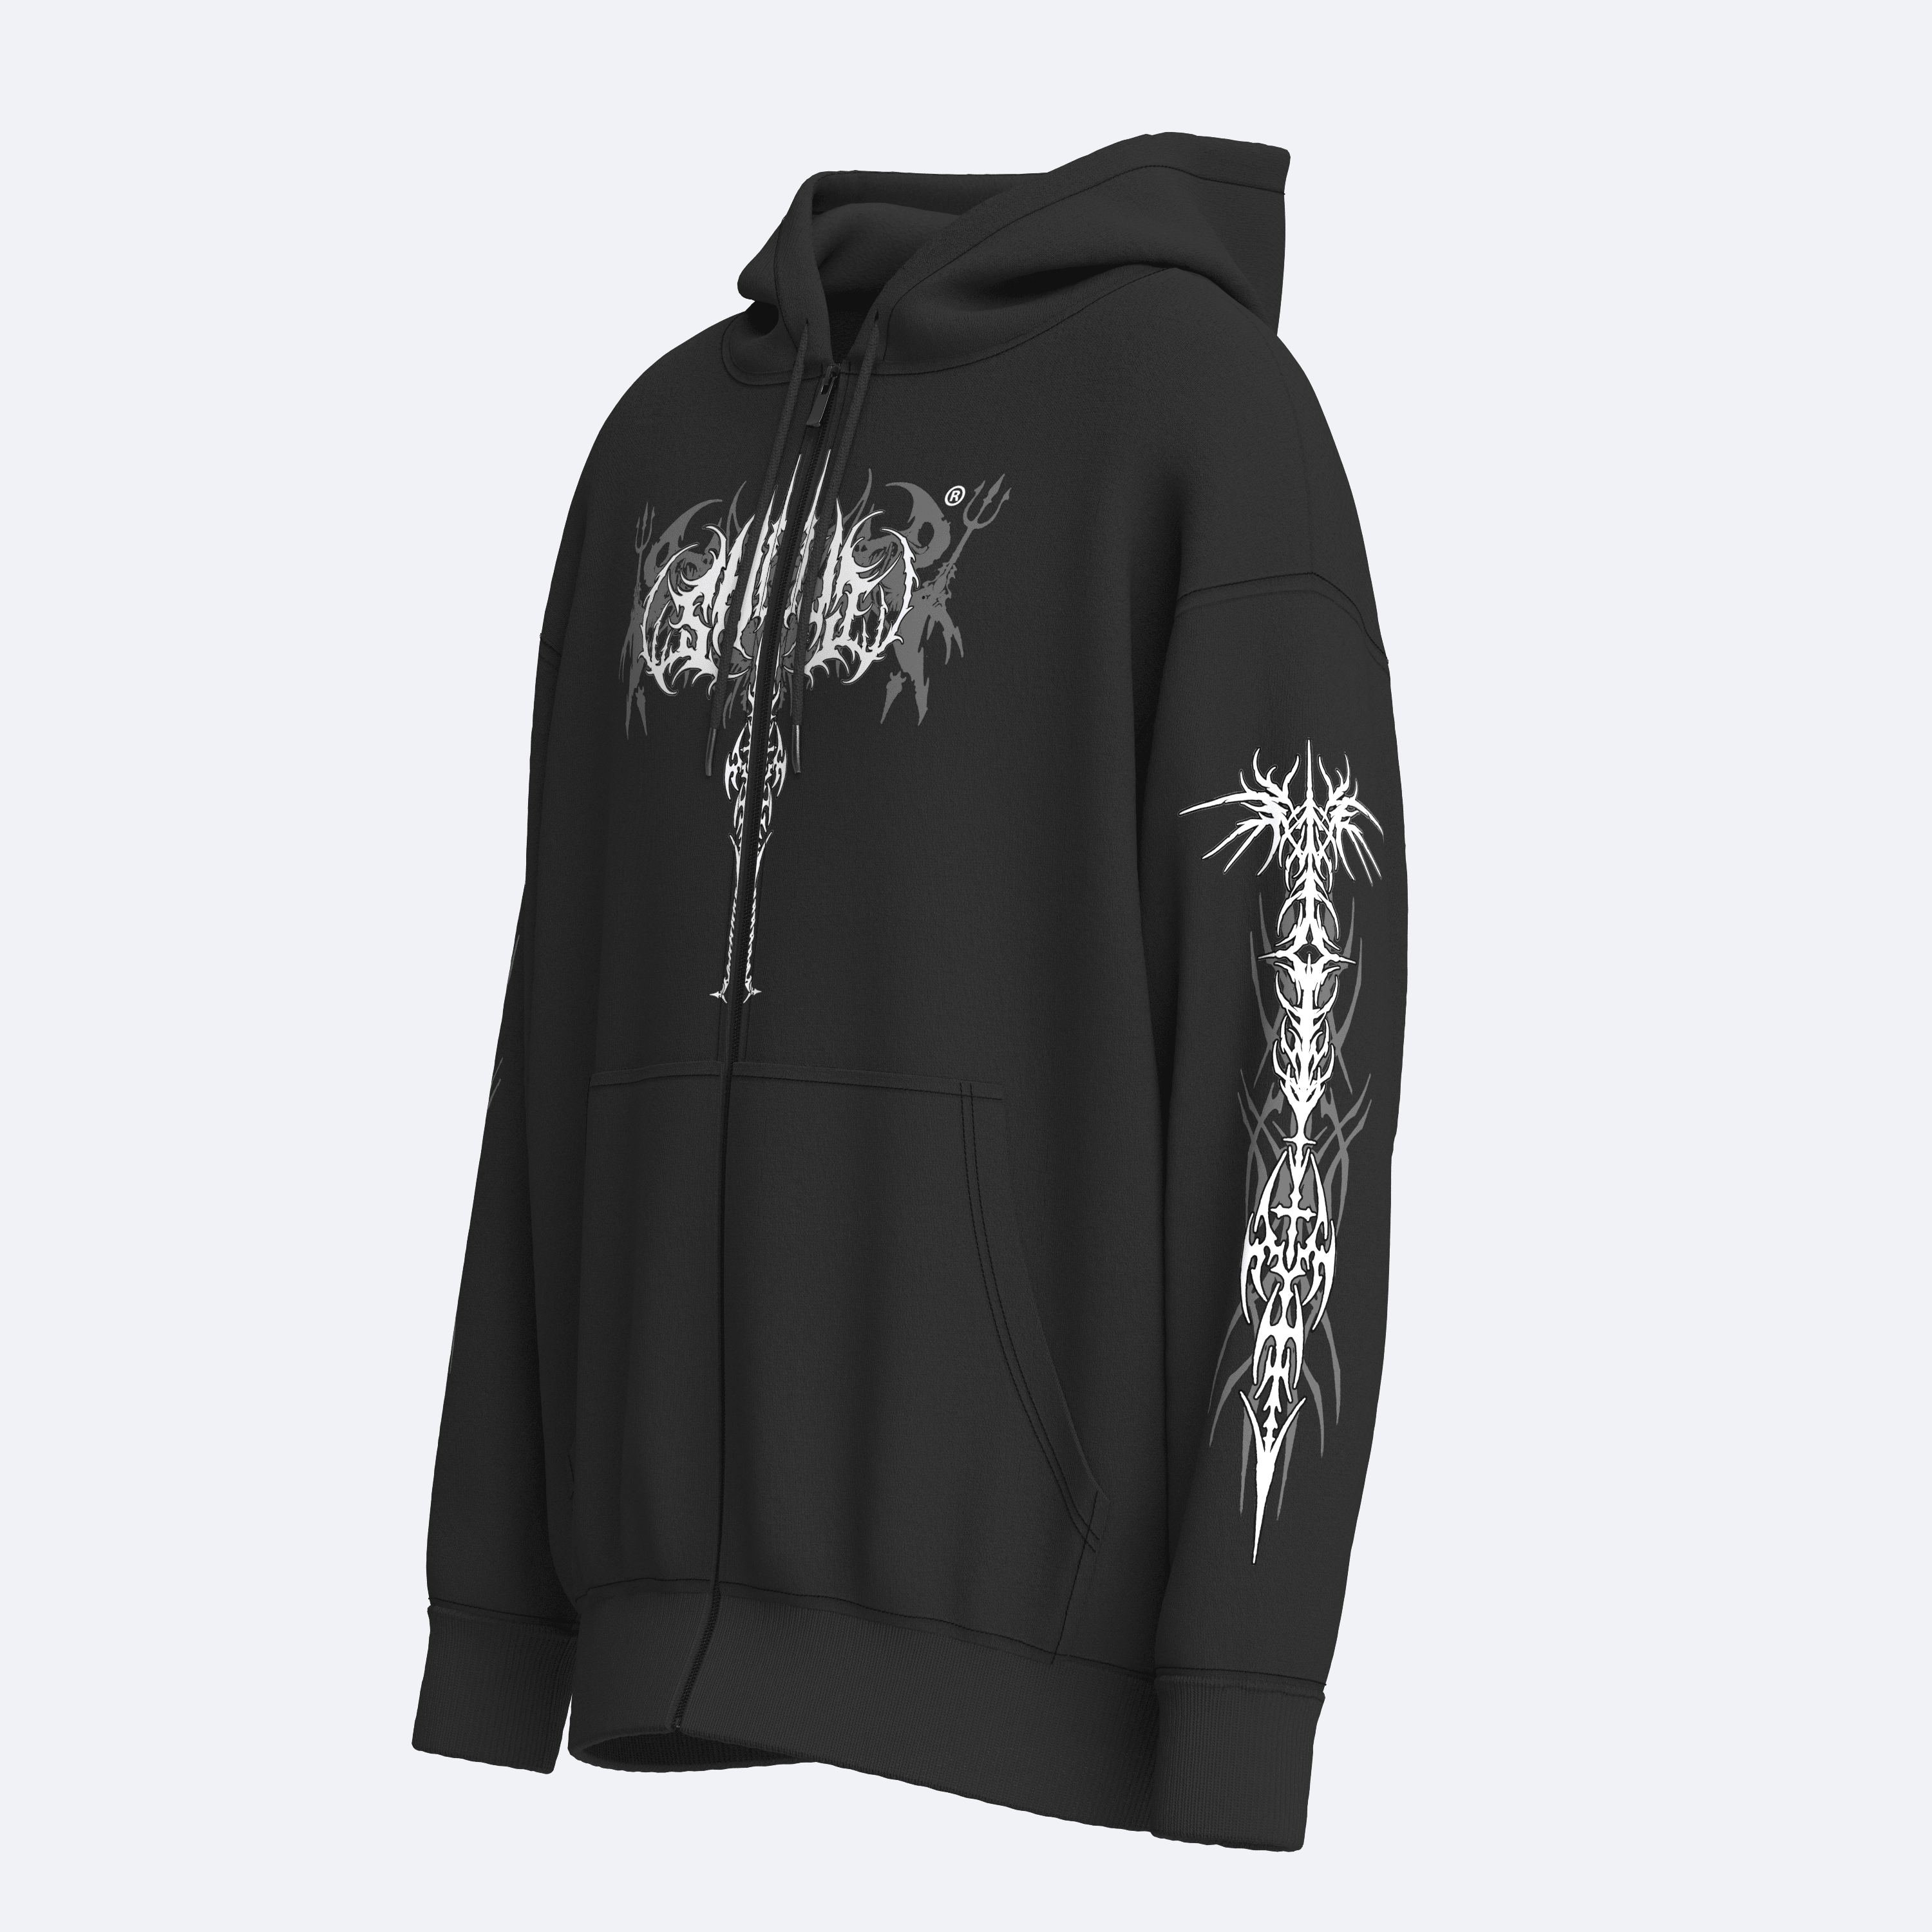 Oversize Shout Limited Edition Brutal Unisex Zip Up Hoodie